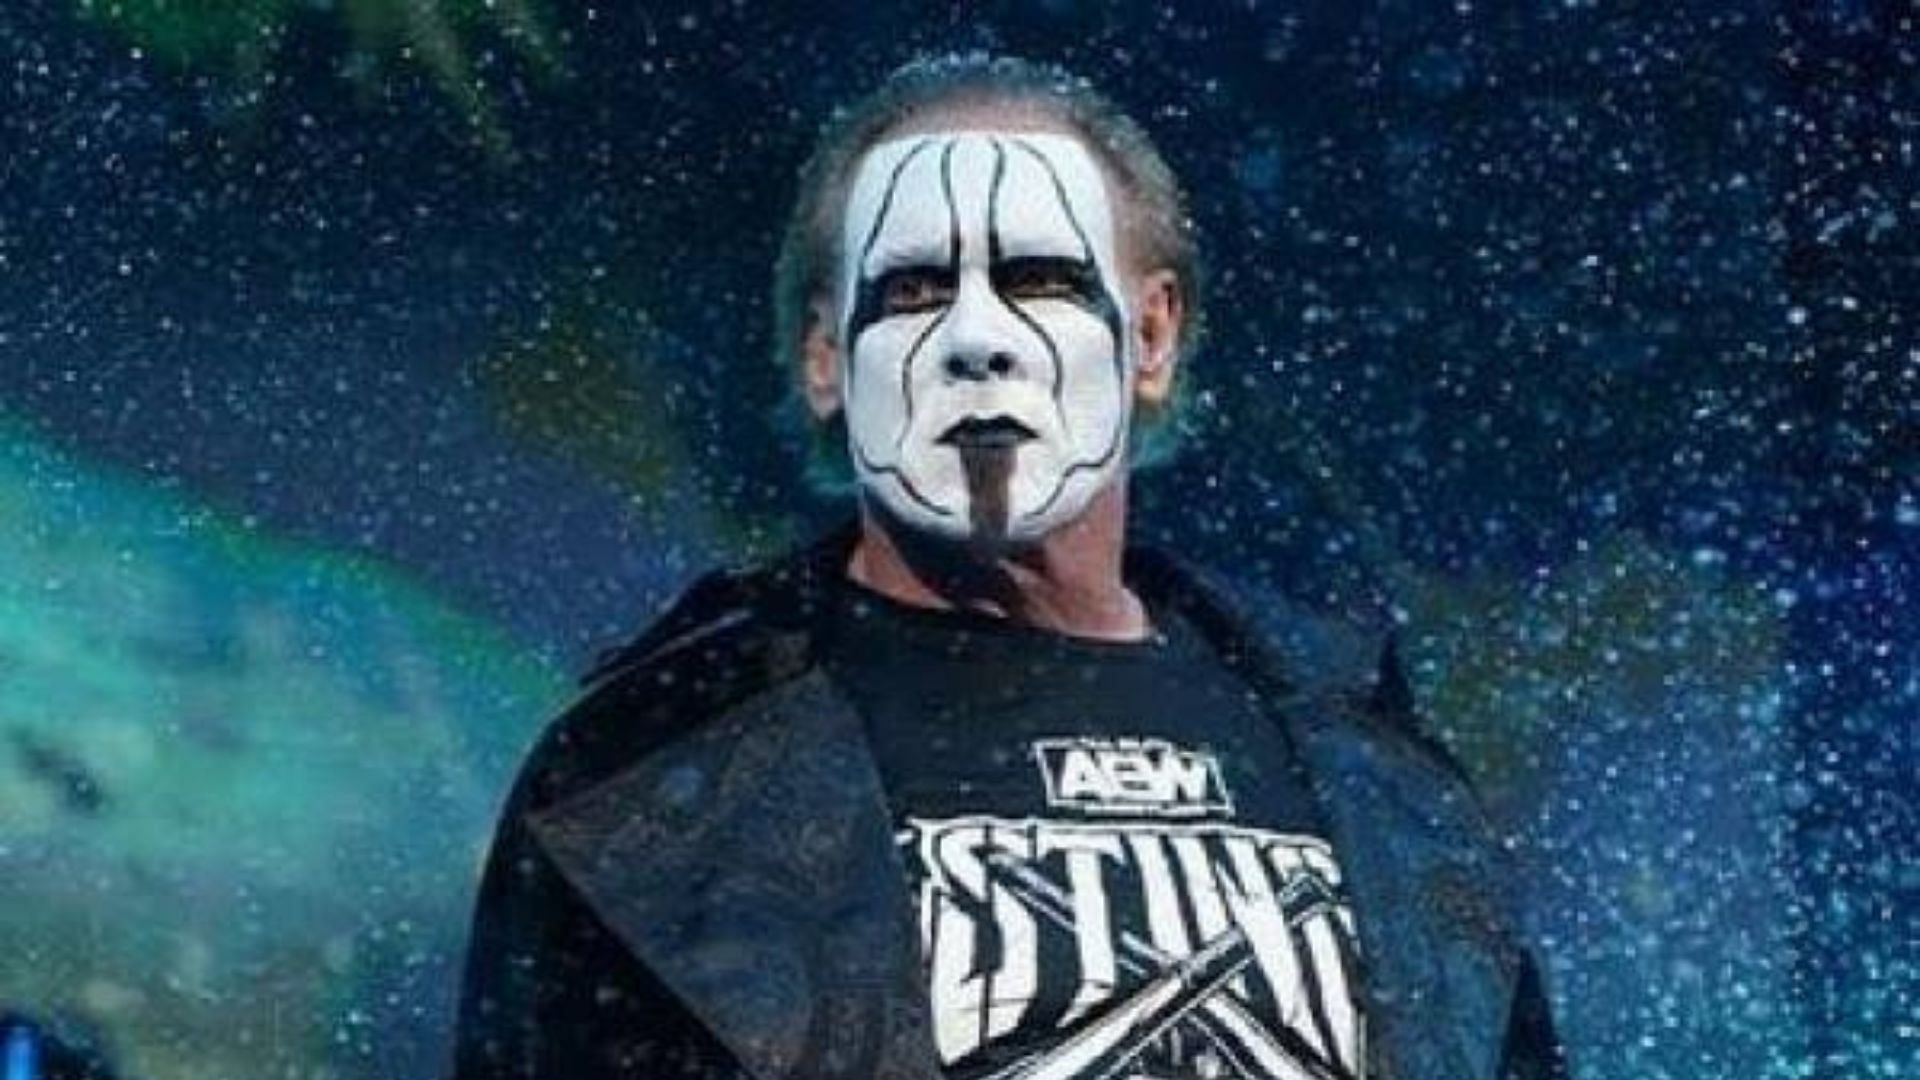 Sting needs a worth opponent for his retirement match.